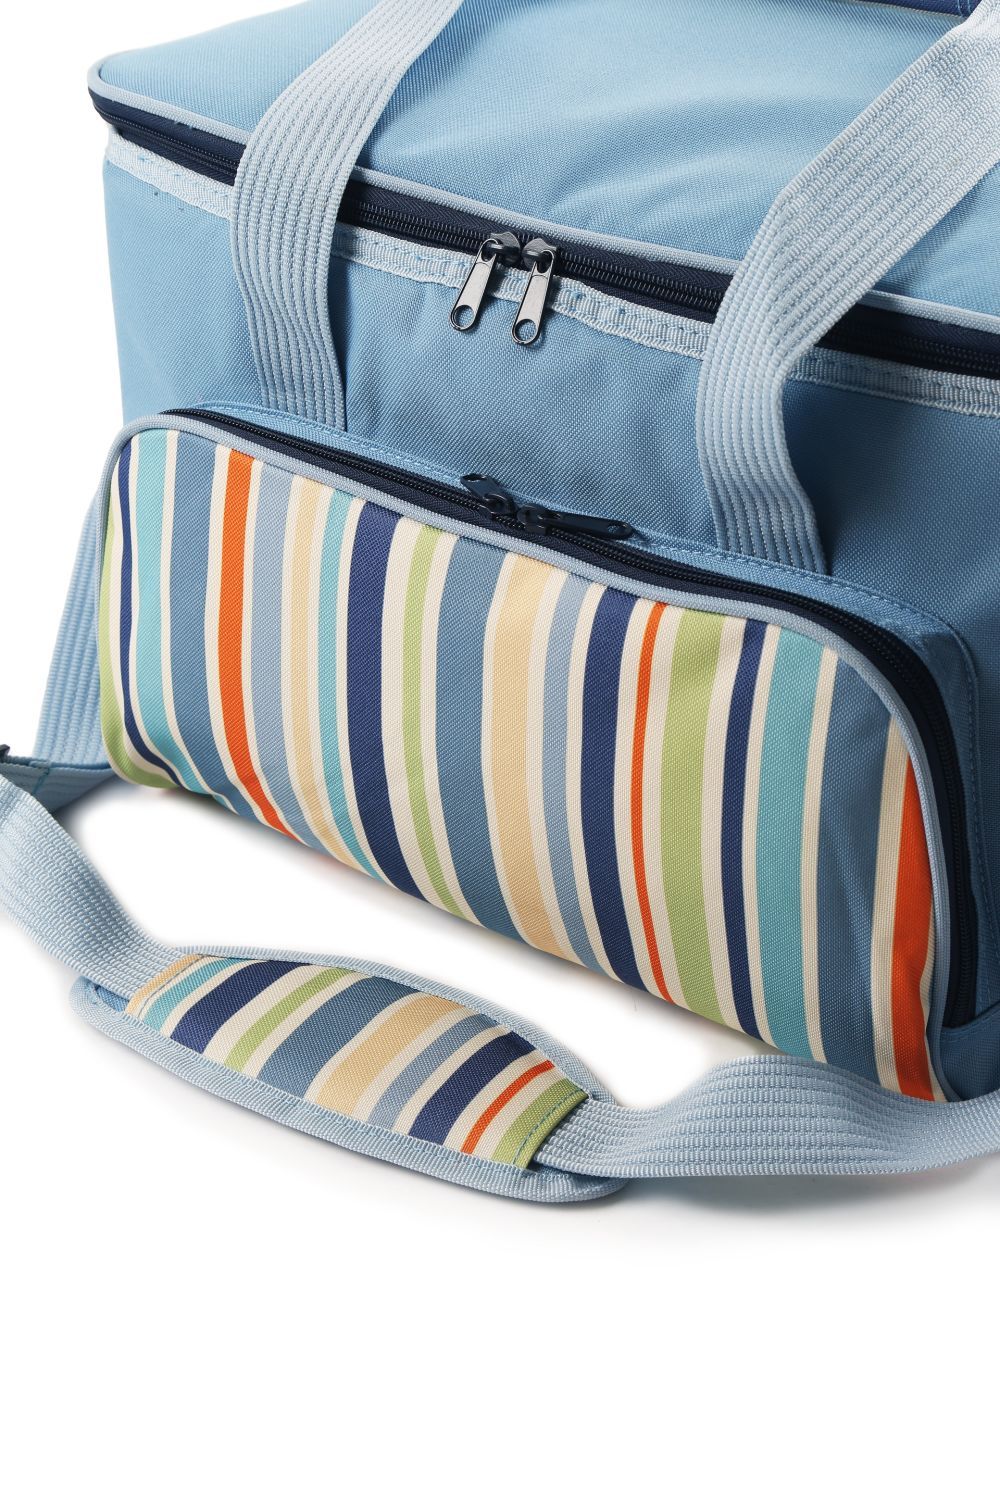 Greenfield Collection Foldable Family Picnic Cool Bag 30L - Sky Blue - Holiday Accent Ltd